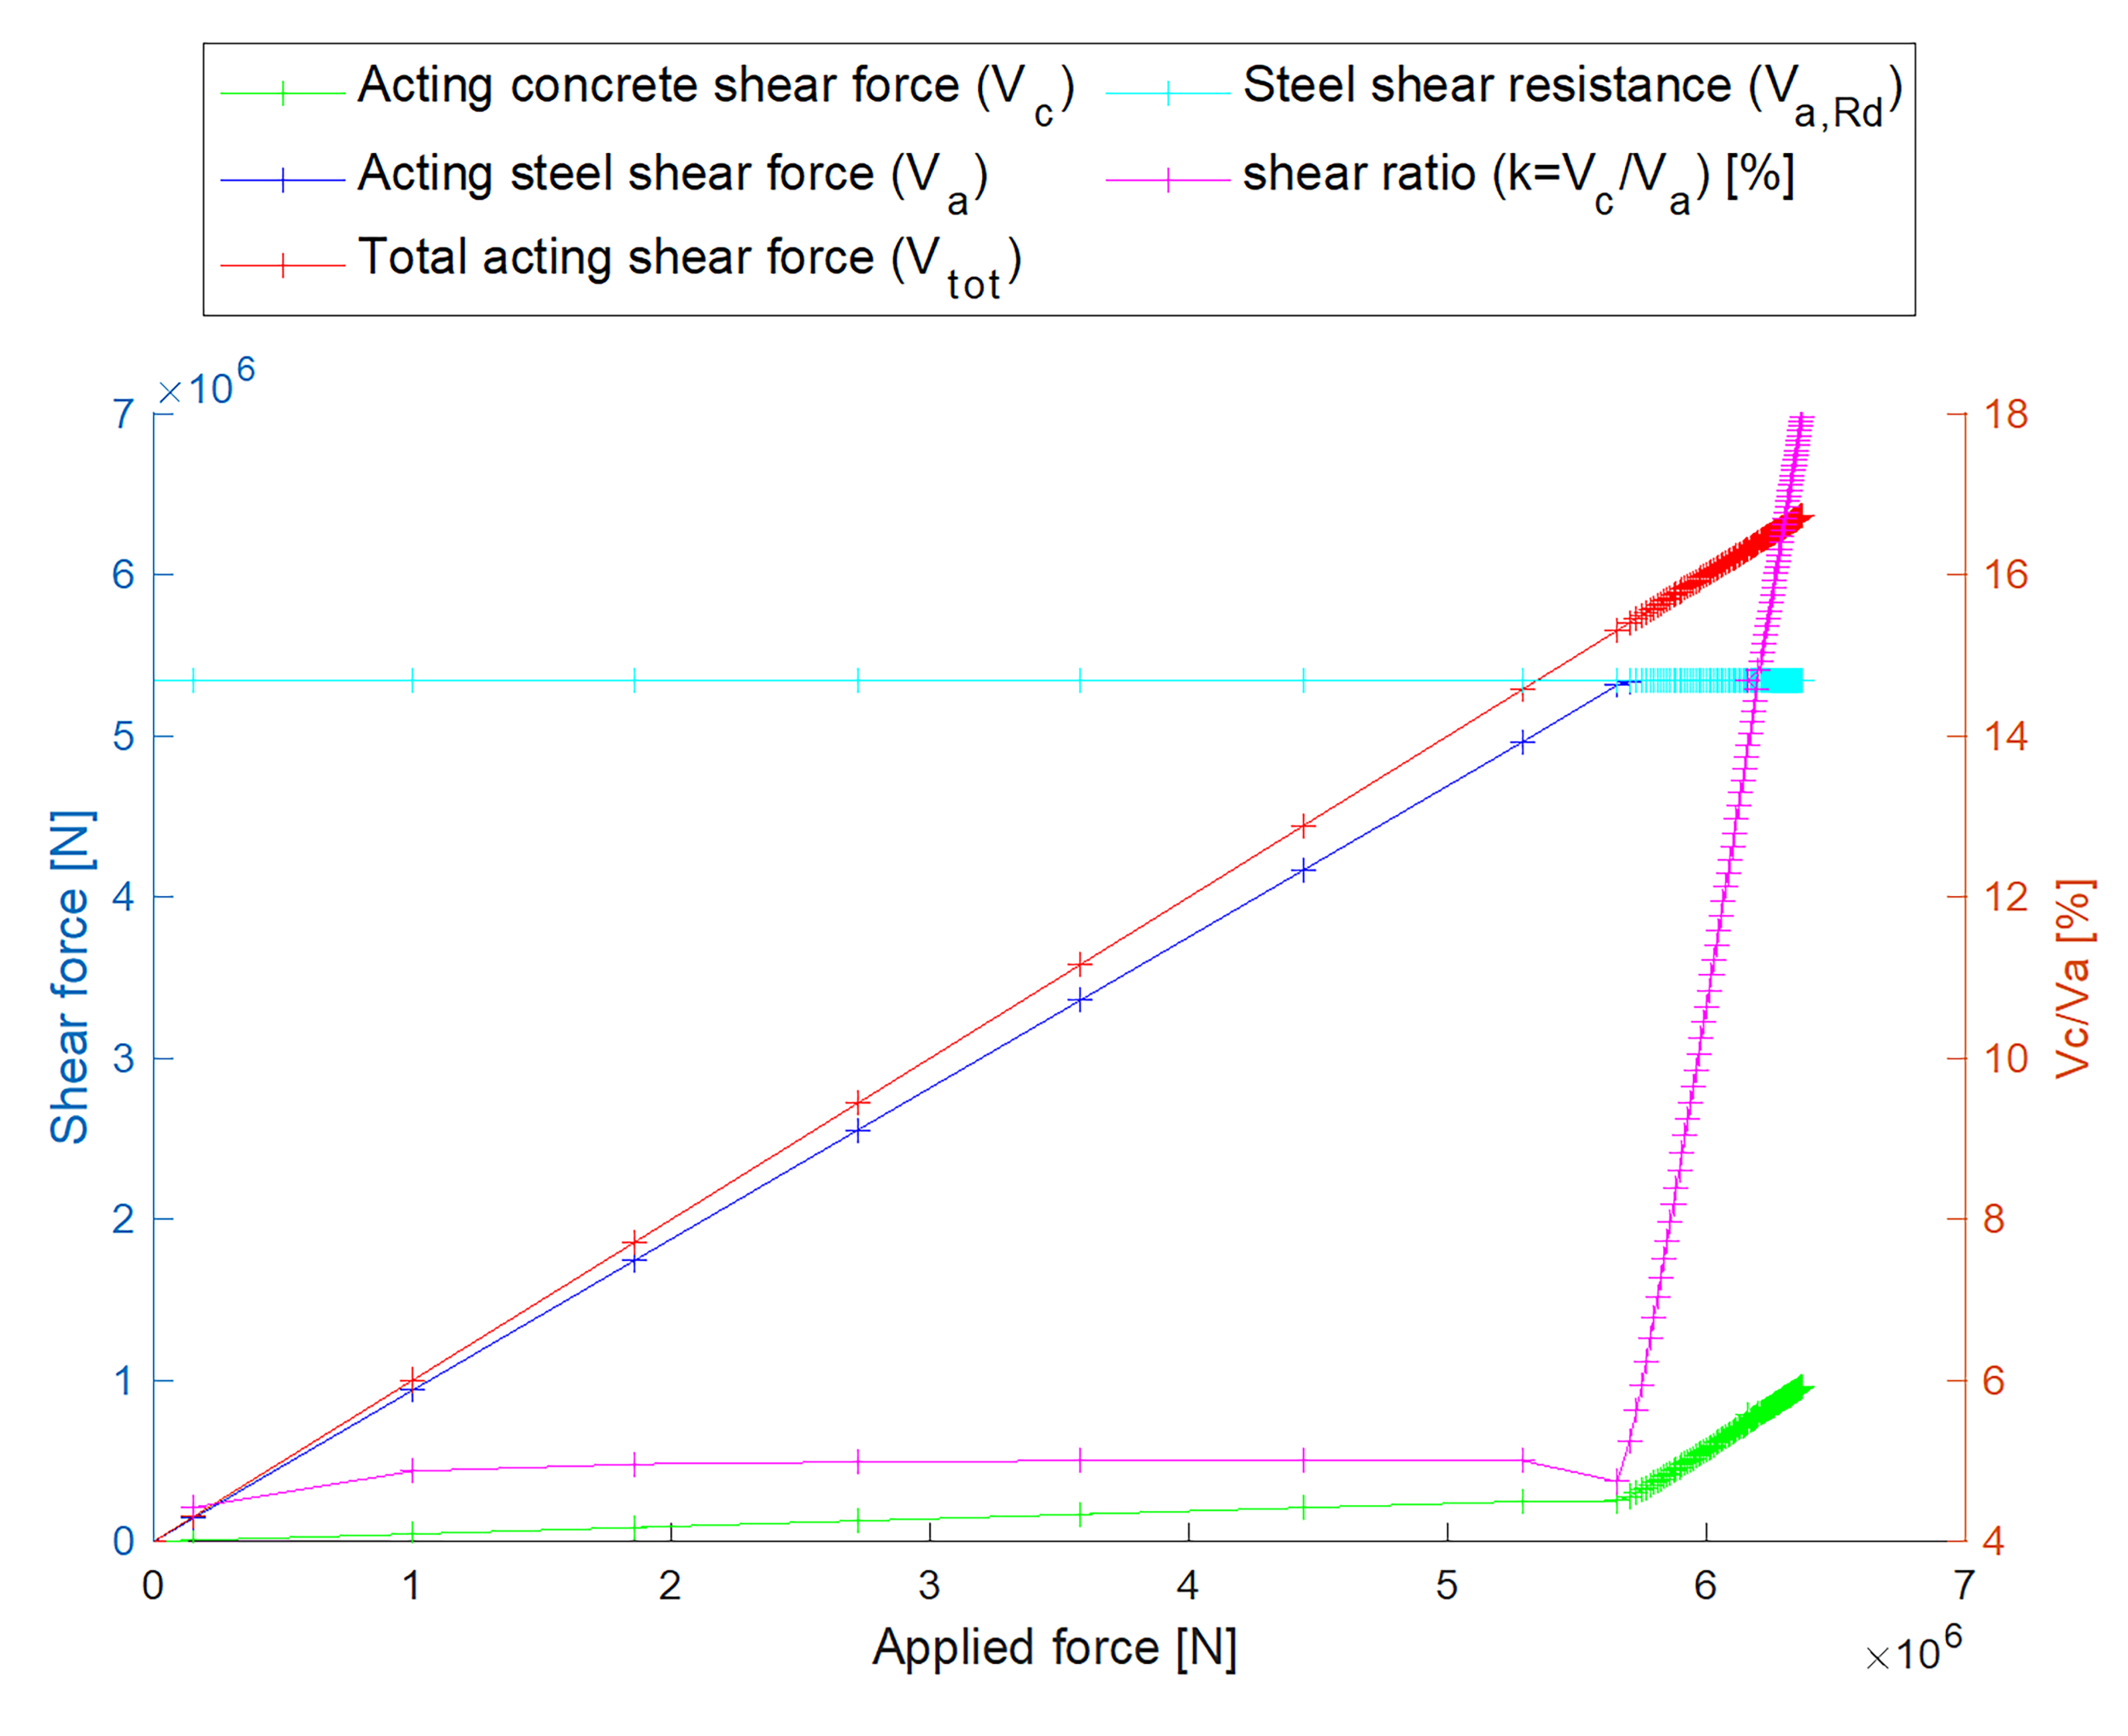 Shear force development for each load step